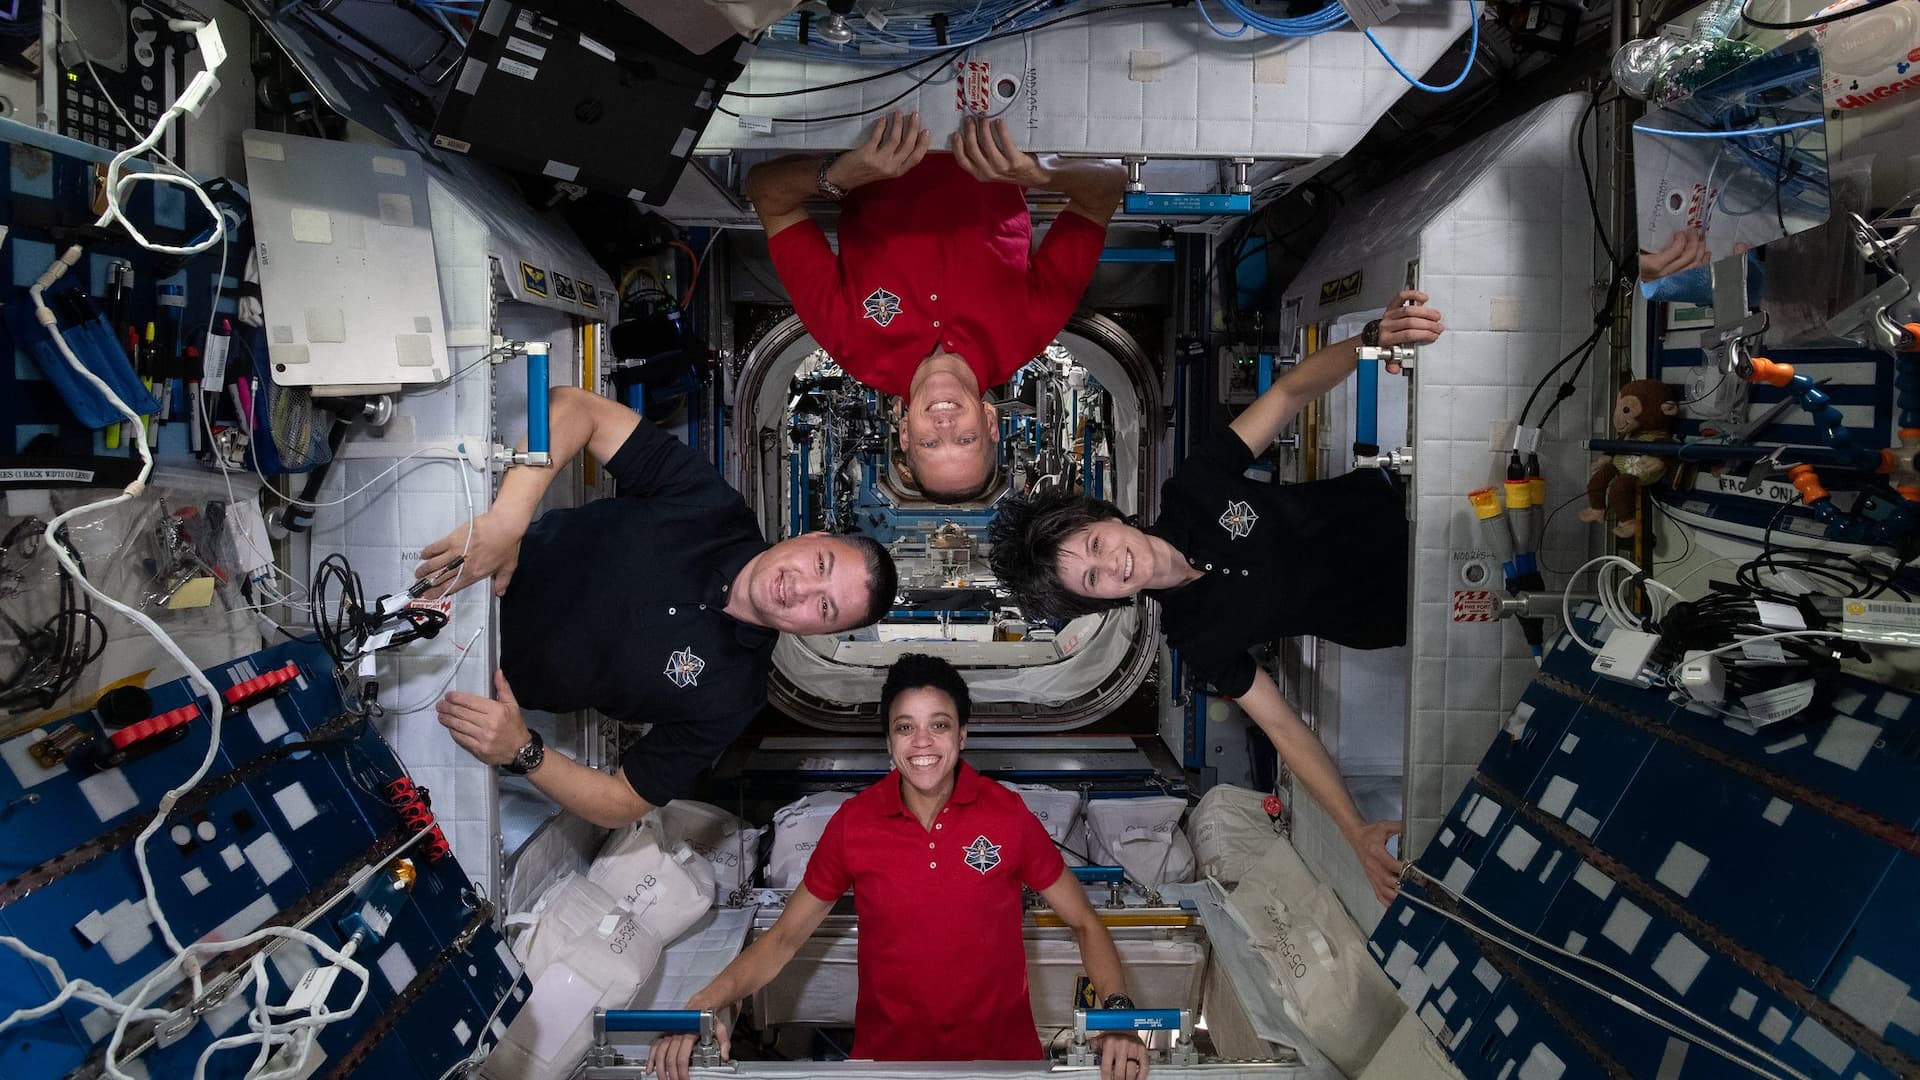 Astrosamantha has returned to Earth